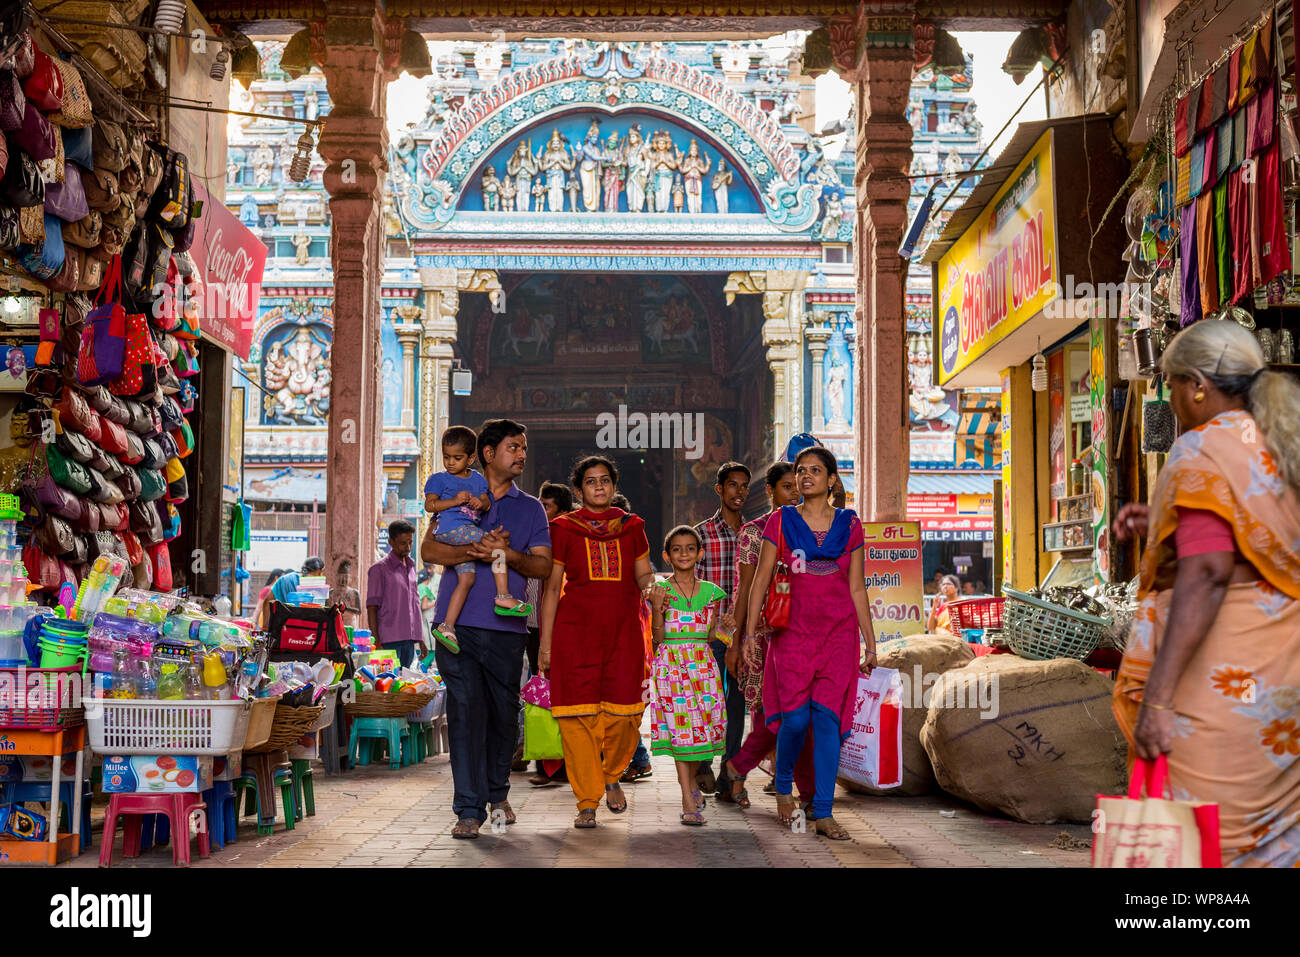 Madurai, Tamil Nadu / India - January 14, 2016: an Indian family walks through an arch occupied by shops, with famous Meenakshi Temple behind. Stock Photo